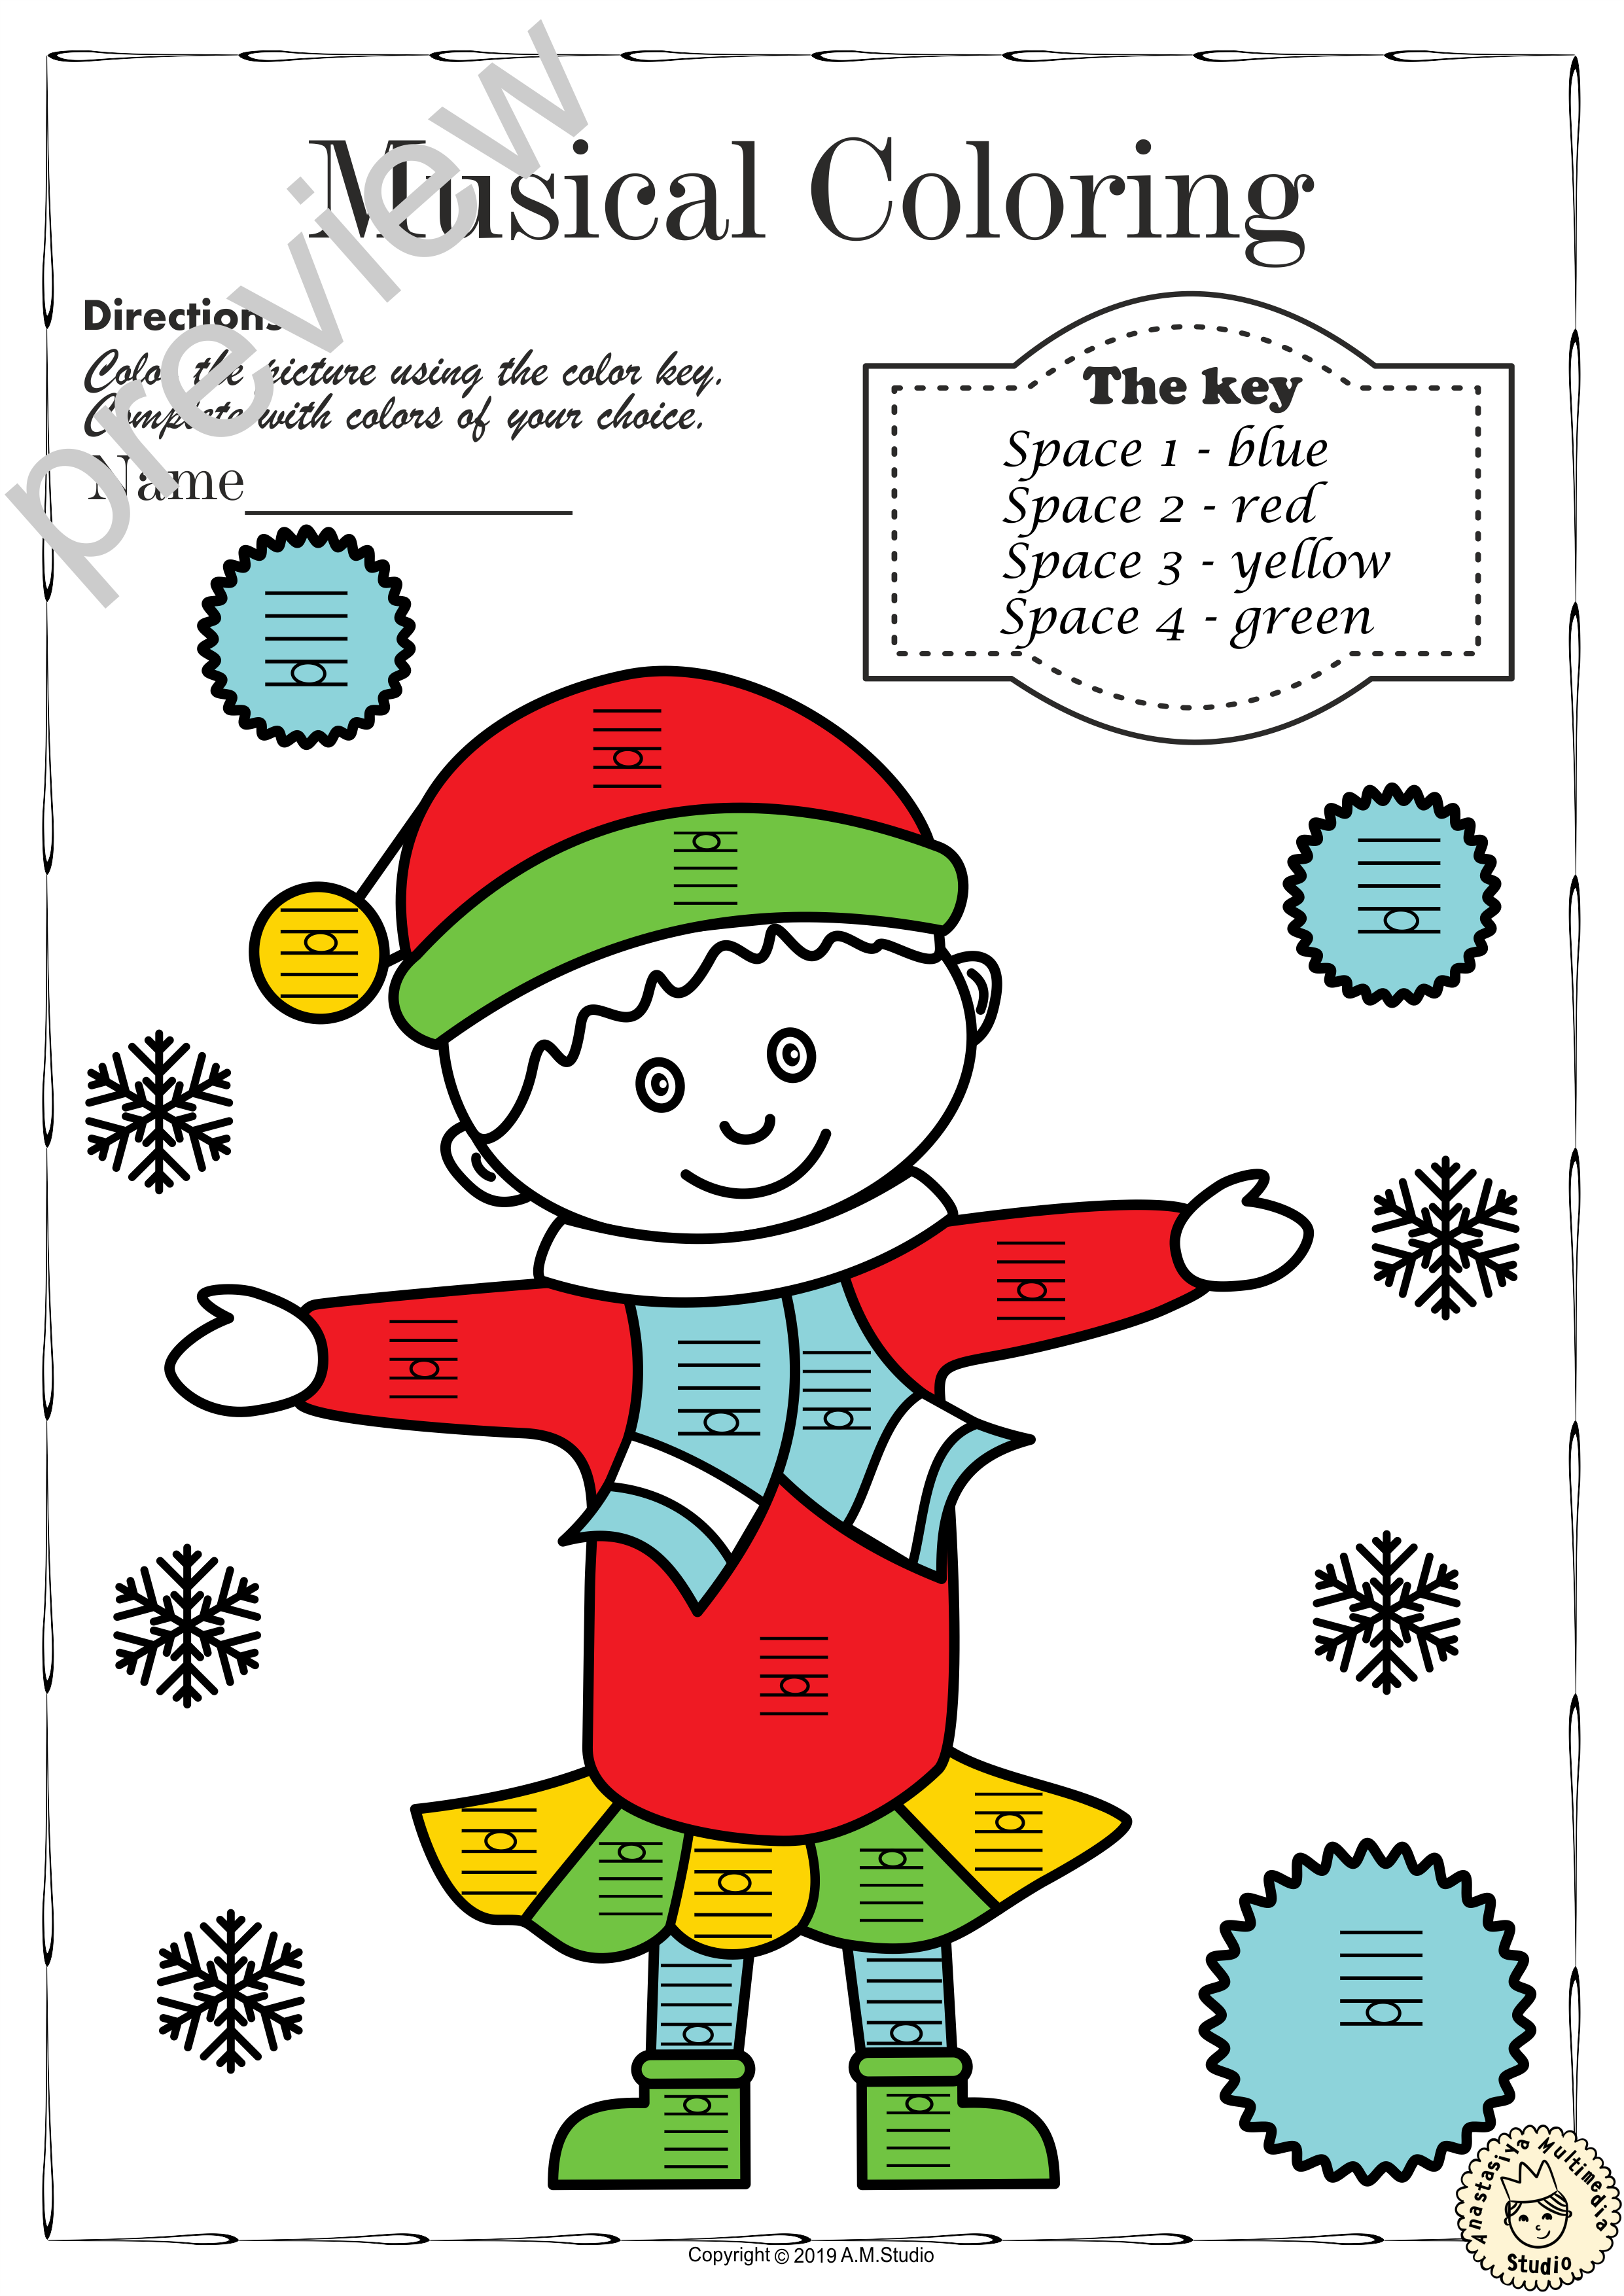 Musical Coloring Pages for Winter {Lines and Spaces} with answers (img # 5)